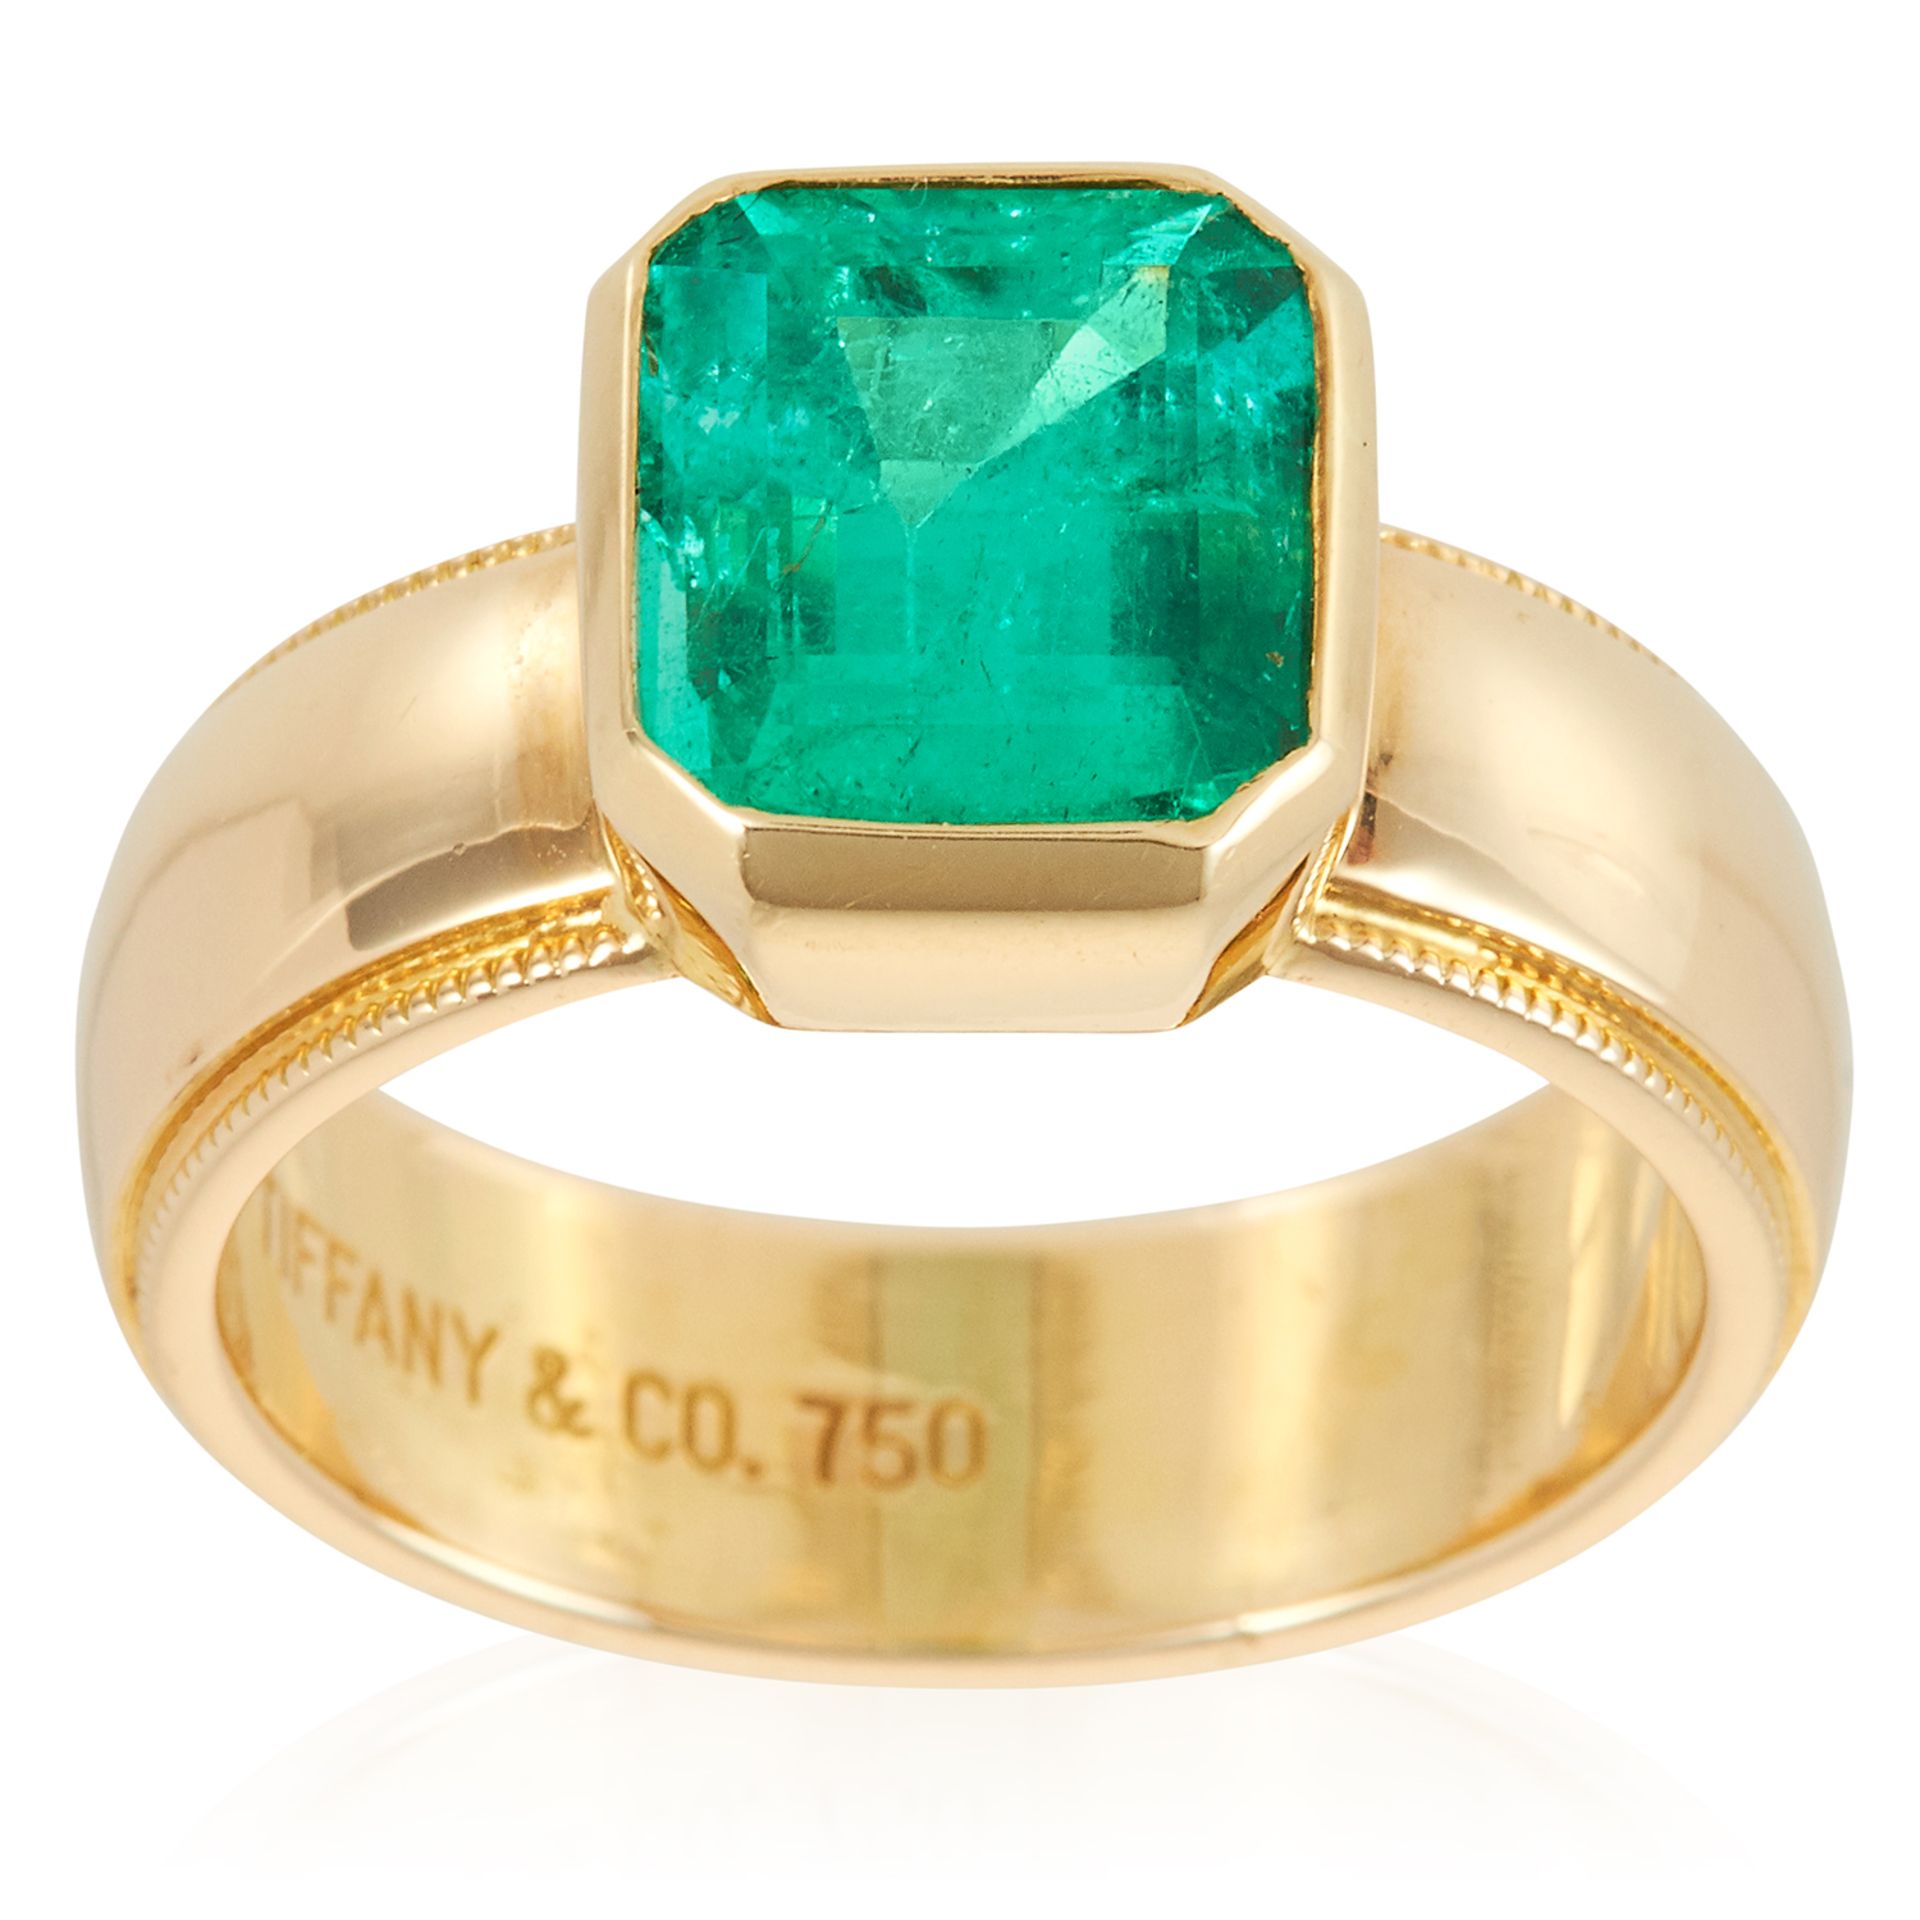 A 2.85 CARAT COLOMBIAN EMERALD RING, TIFFANY & CO in 18ct yellow gold, set with a step cut emerald